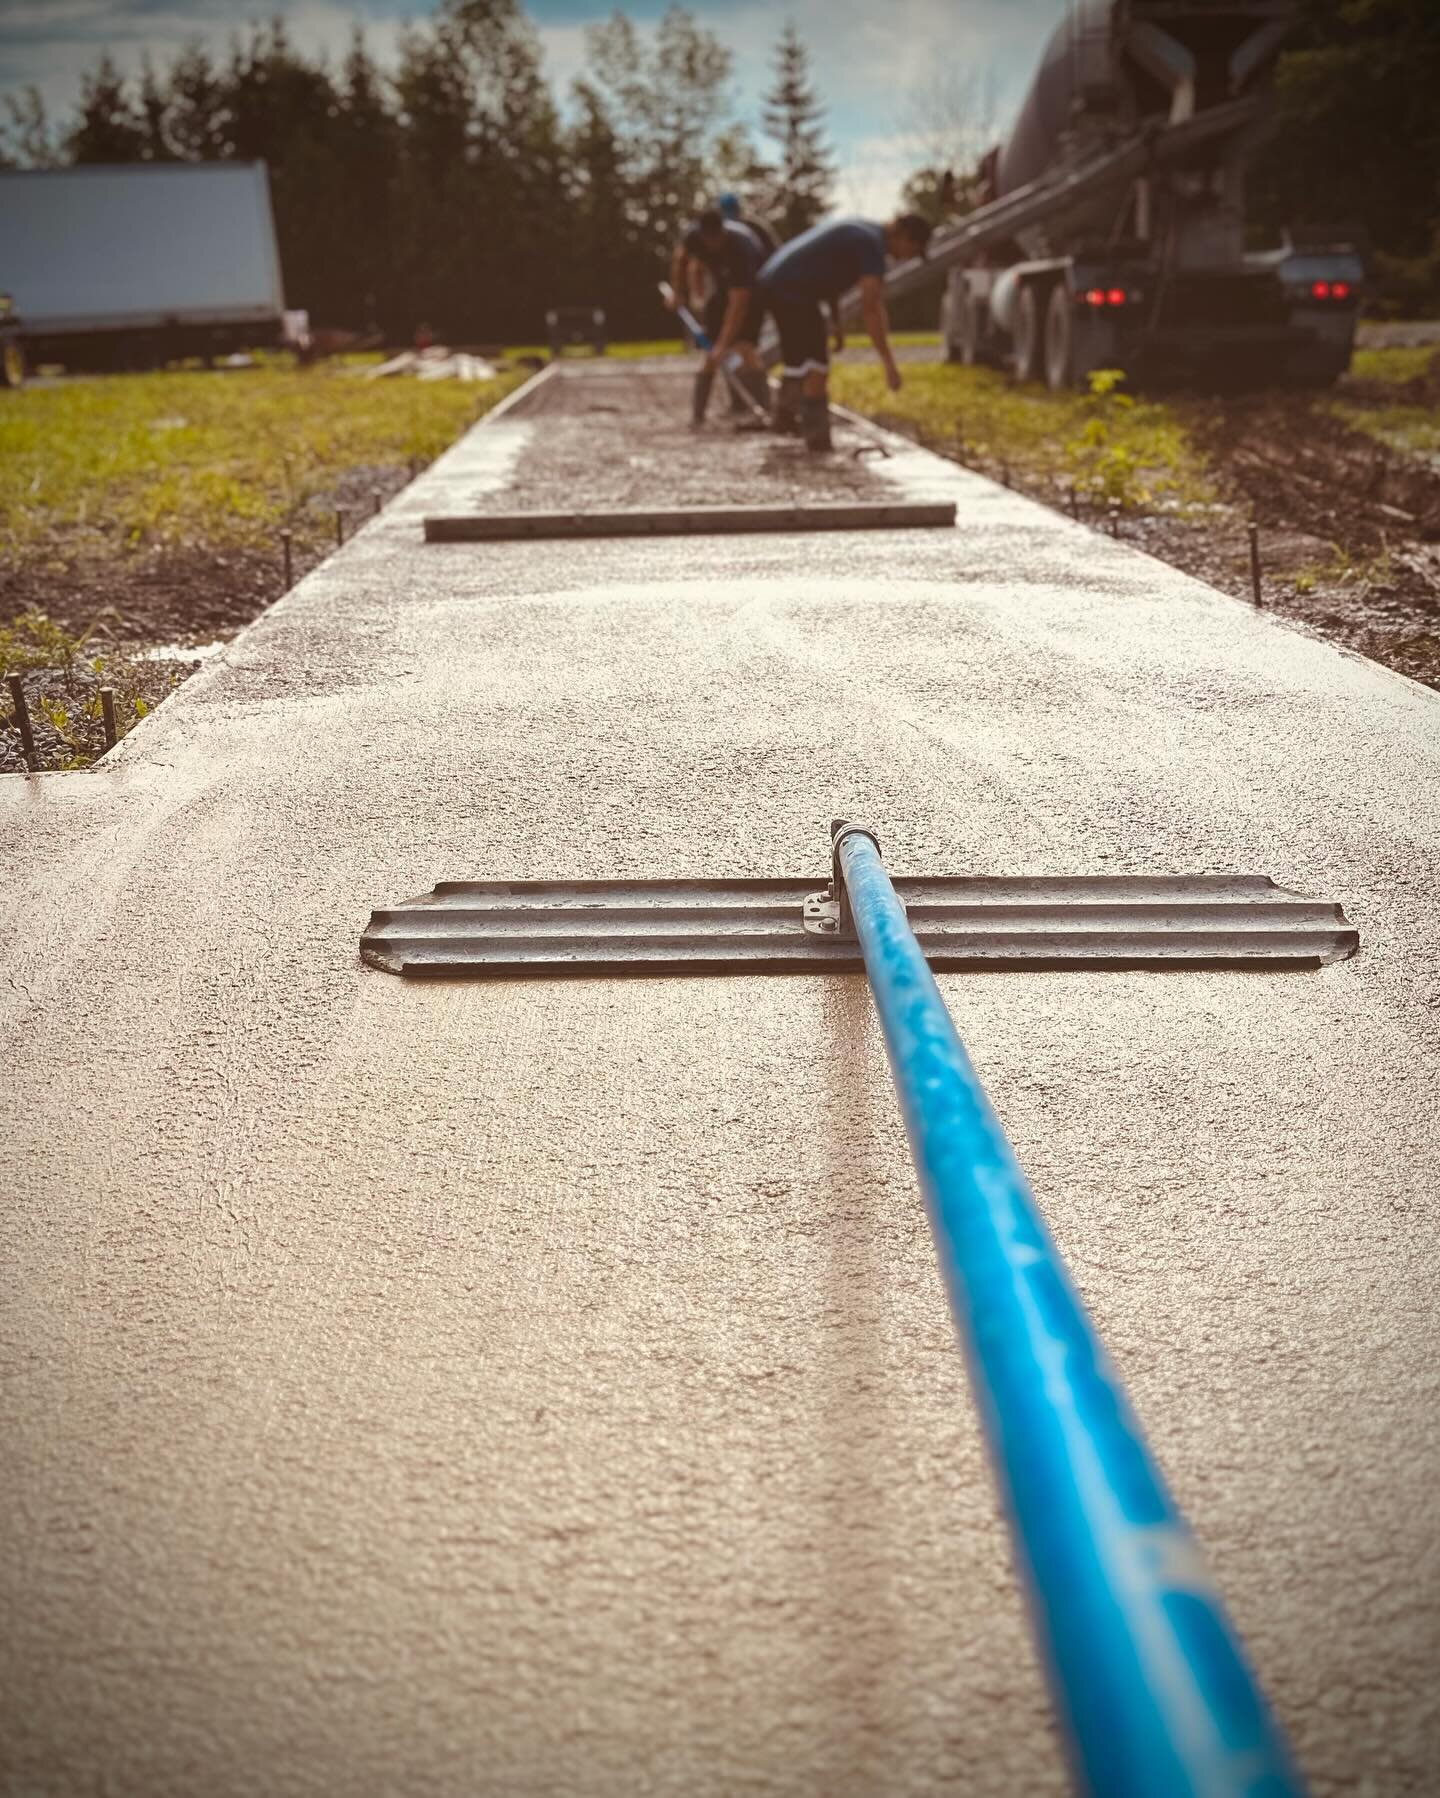 Excited to see this beautiful 100&rsquo; sidewalk come to life with the custom colour exposed aggregate, concrete finish. 
.
.
.
#concrete #landscaping #exposedaggregate #bowfloat #concretedesign #concreteconstruction